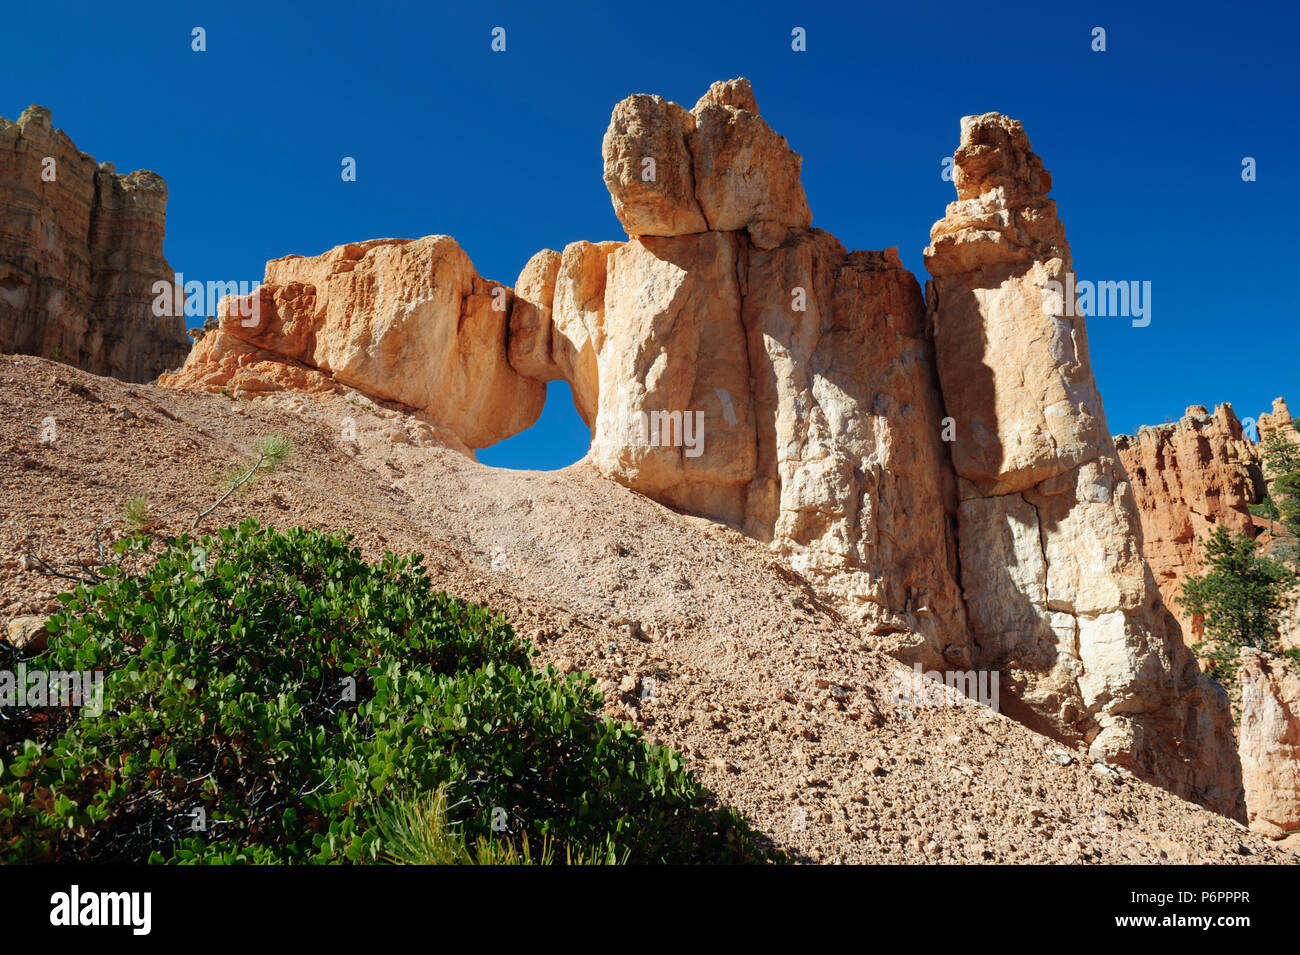 Spectacular eroded sansdstone formation againts a deep blue sky in Bryce Canyon National Park, Utah, USA. Stock Photo